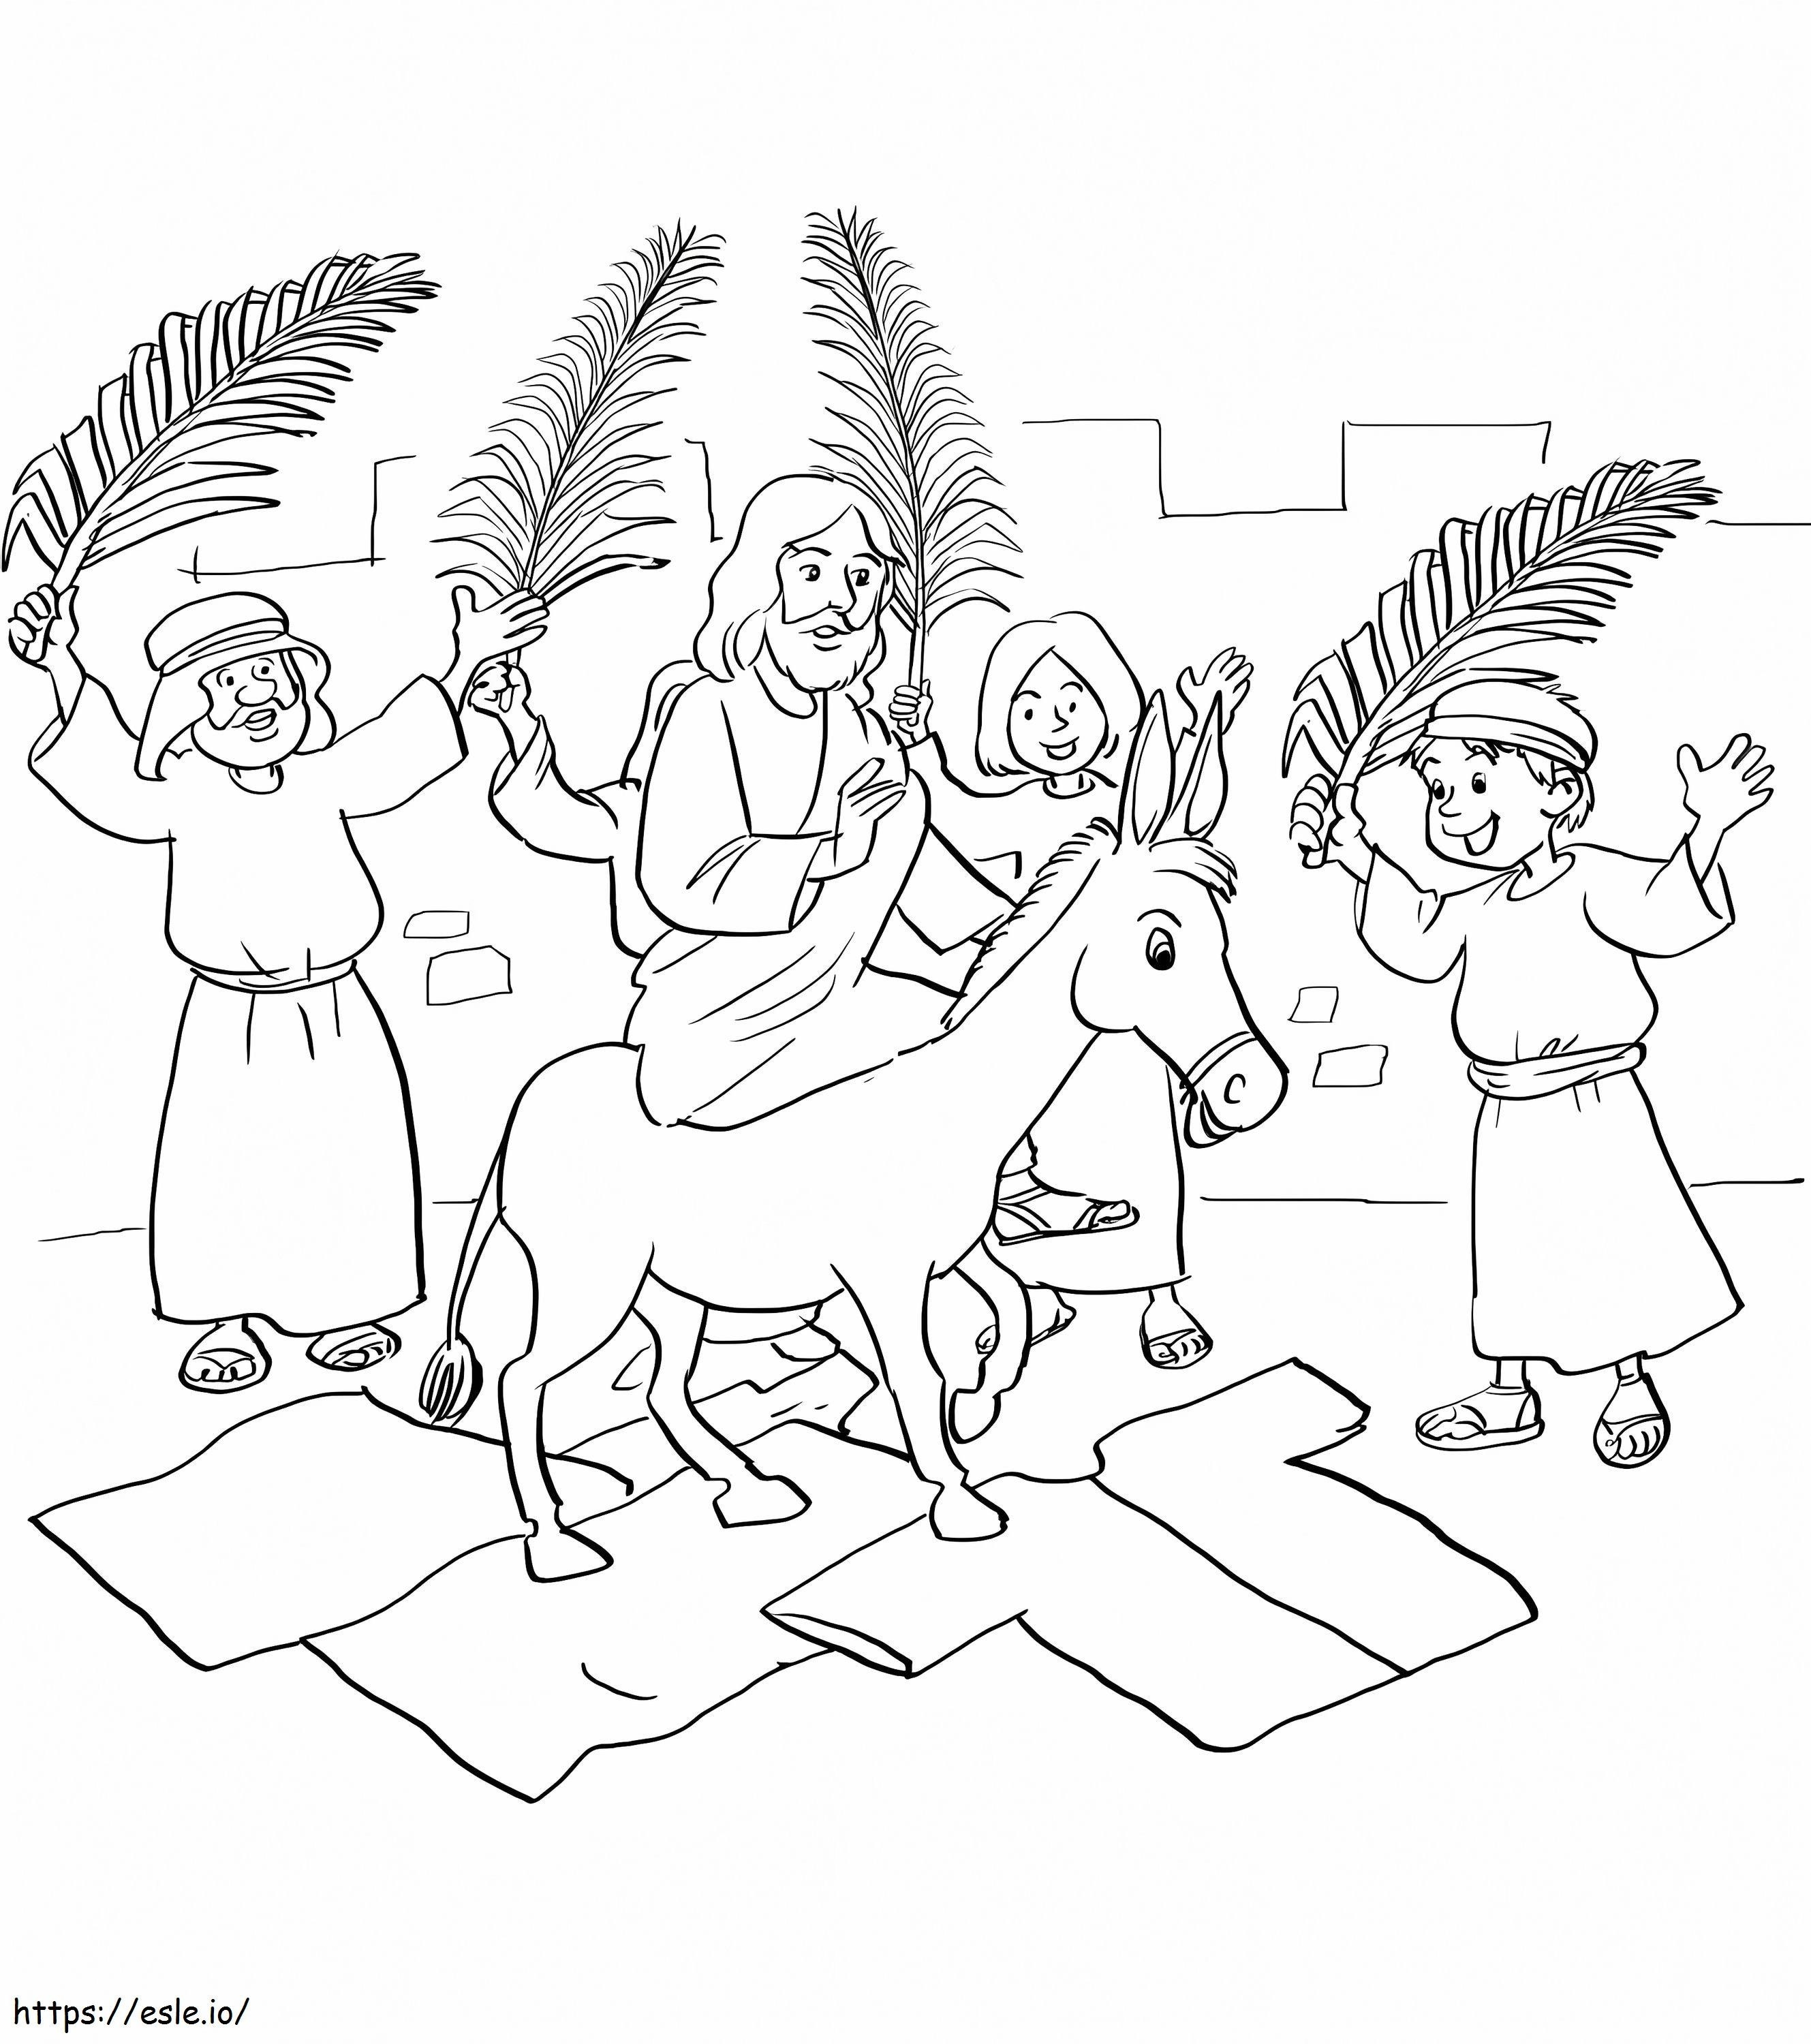 Palm Sunday 3 coloring page